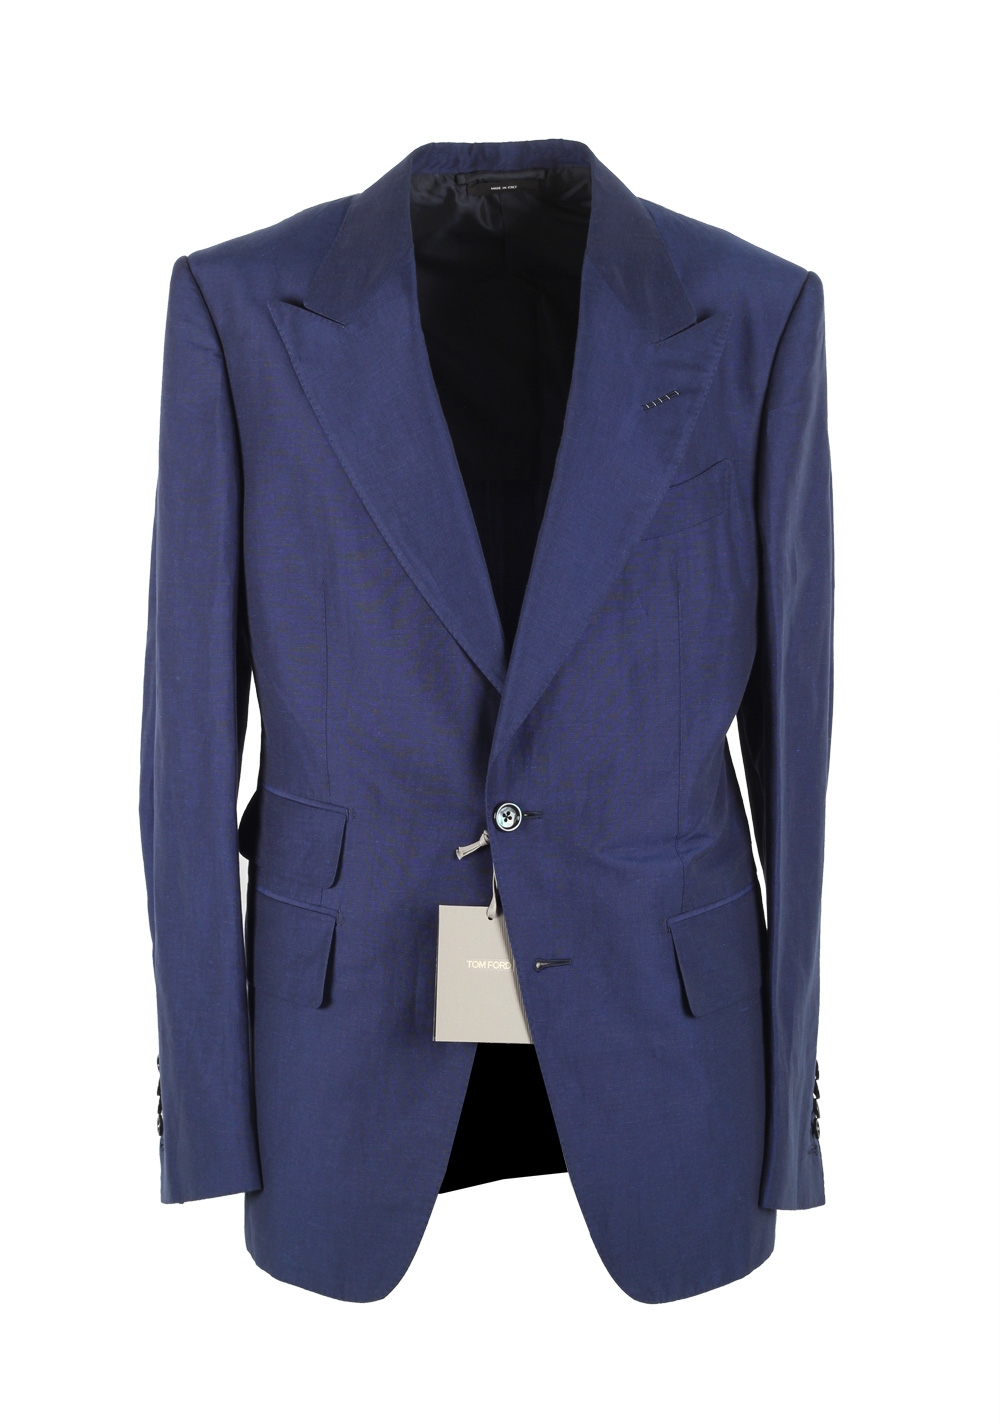 TOM FORD Shelton Blue Suit Size 48 / 38R U.S. In Linen Silk | Costume ...